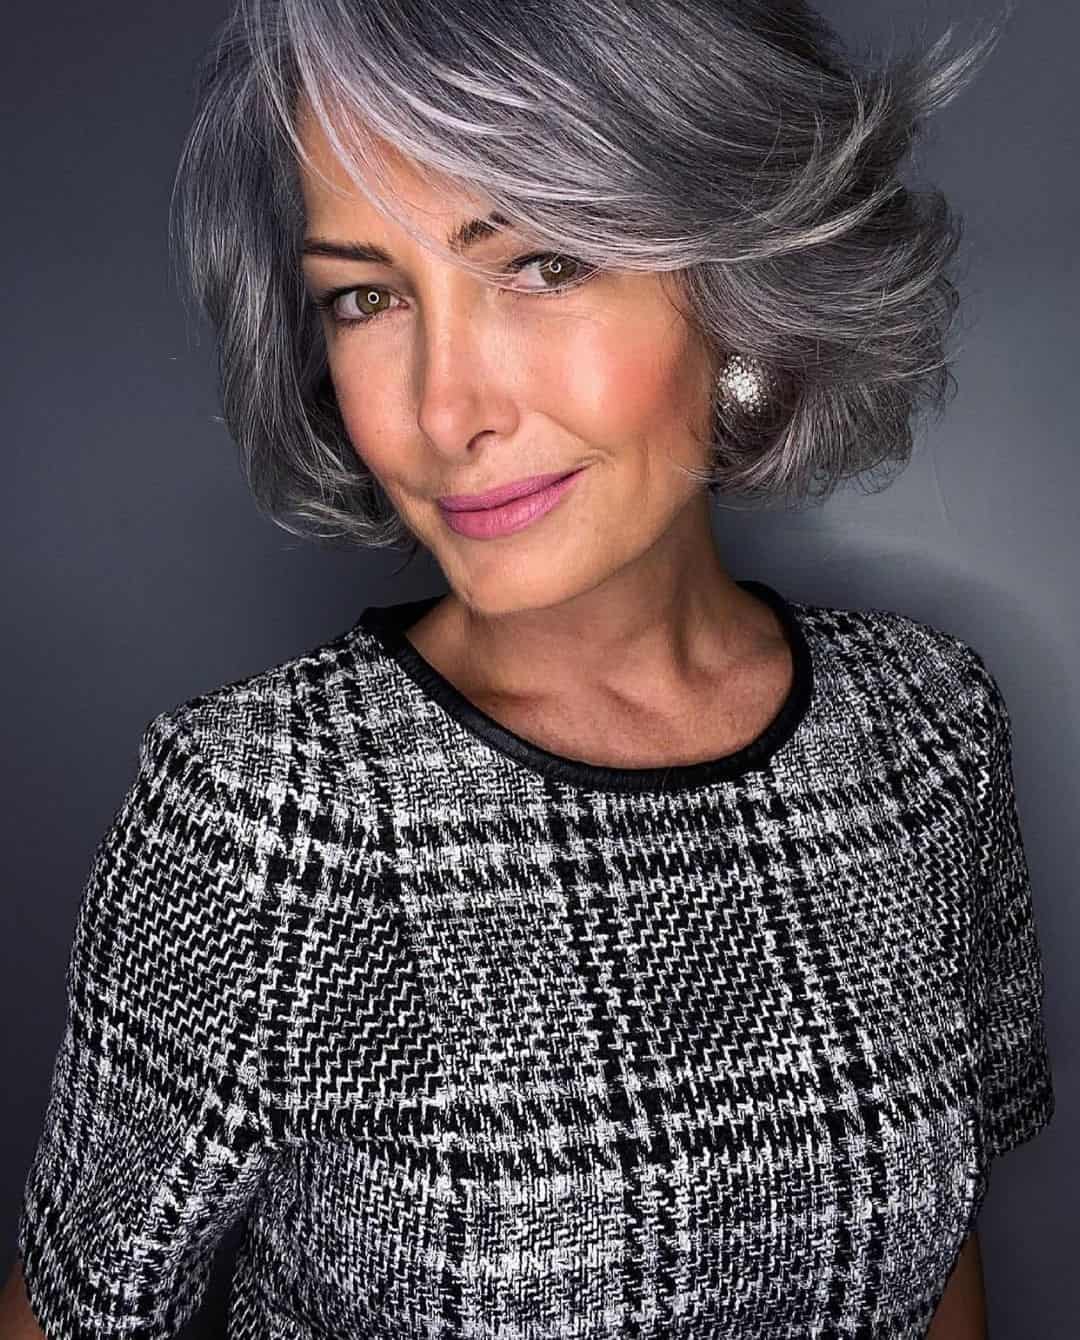 Stylish bob hairstyles for women over 60 that will stay - Stylish bob hairstyles for women over 60 that will stay in demand in 2022